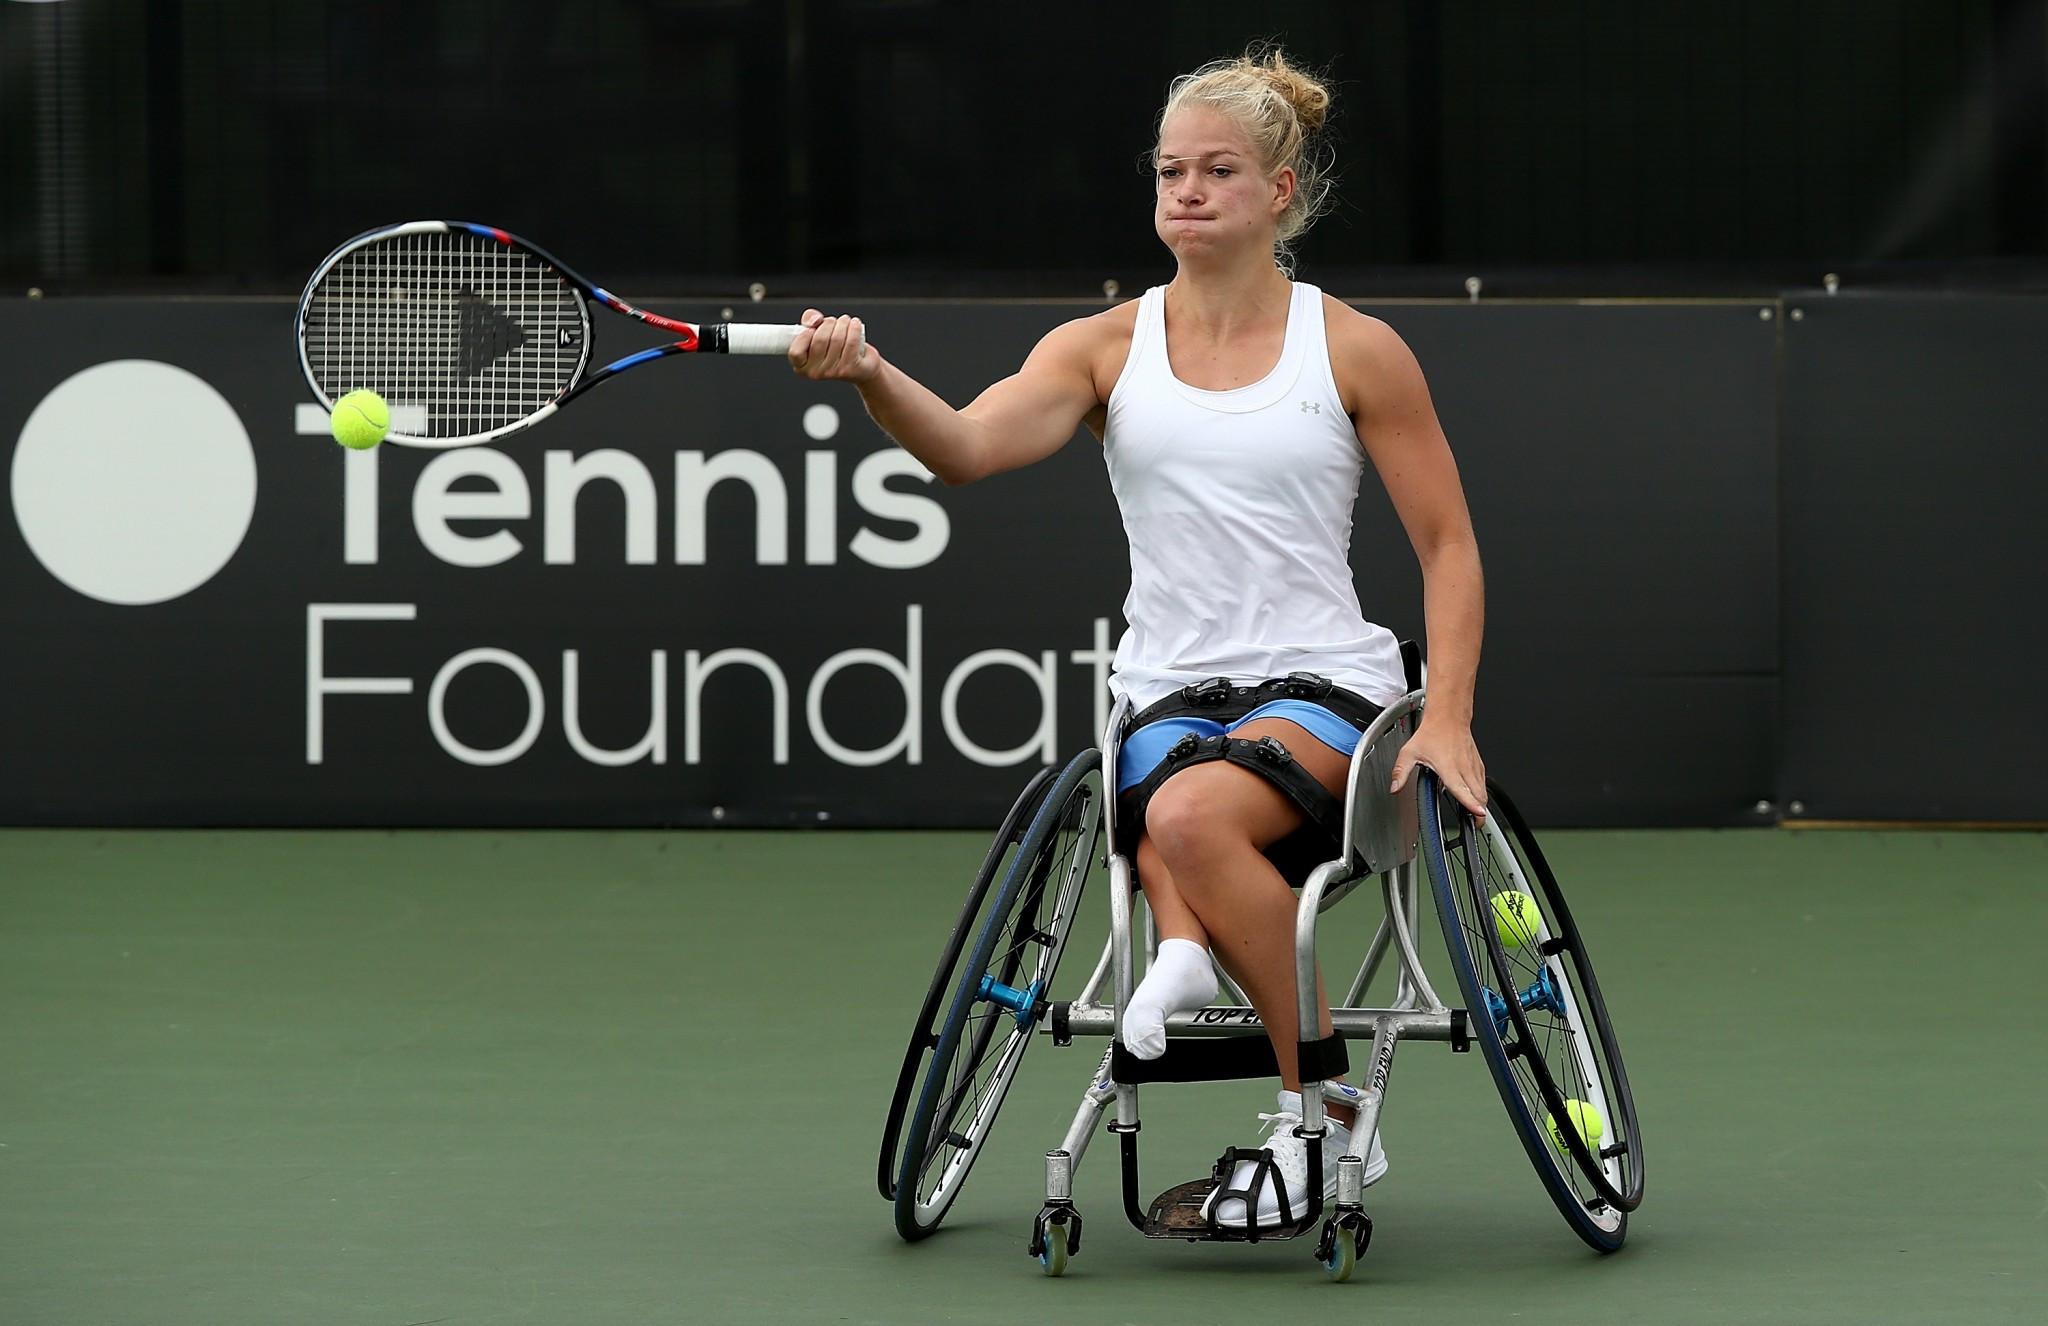 World number one Diede de Groot is aiming to hold all four Grand Slam titles at the same time ©ITF